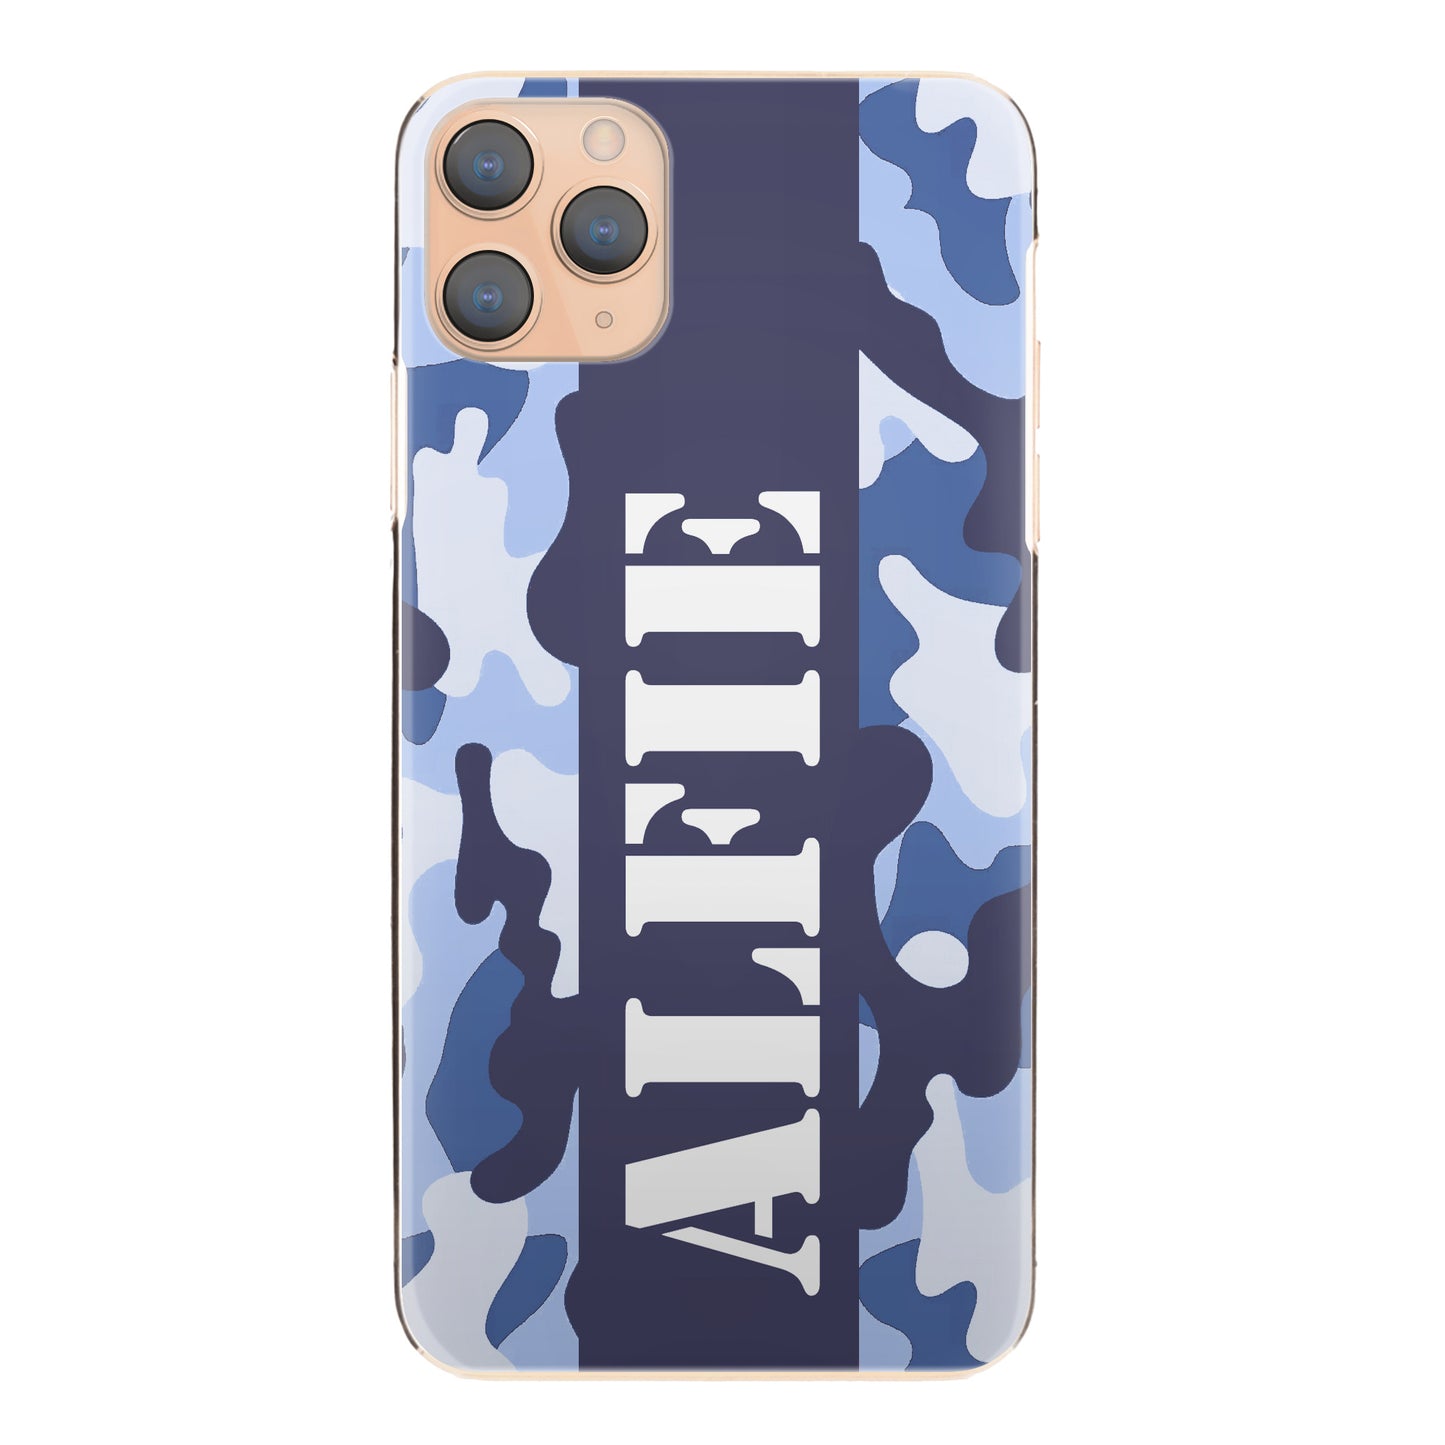 Personalised Google Phone Hard Case with Military Text on Blue Camo